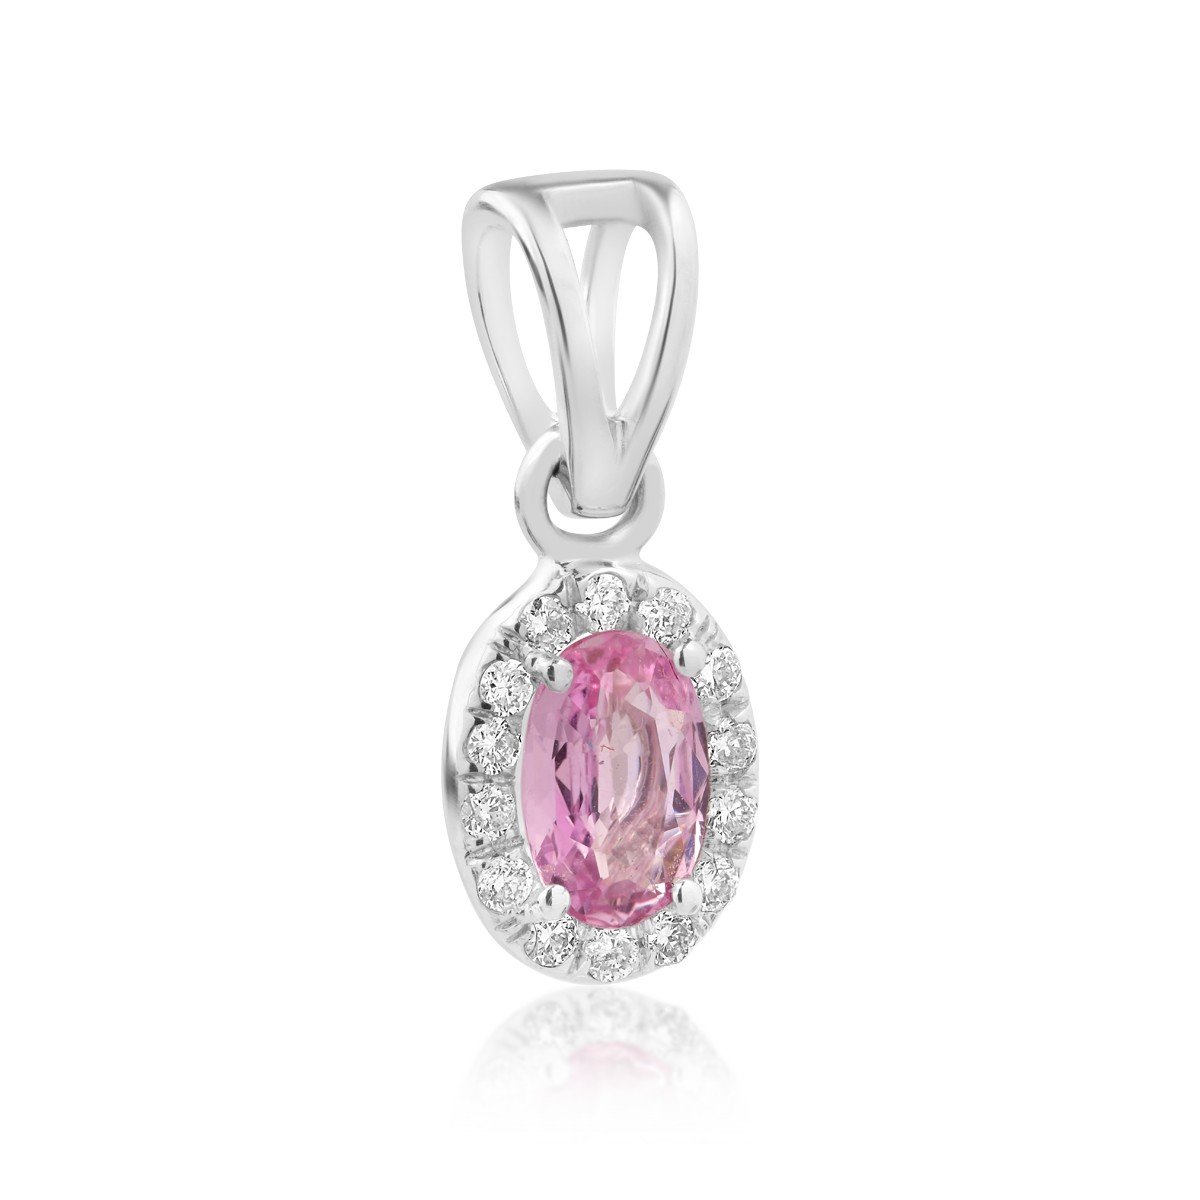 14K white gold pendant with 0.46ct pink sapphire and 0.09ct diamonds